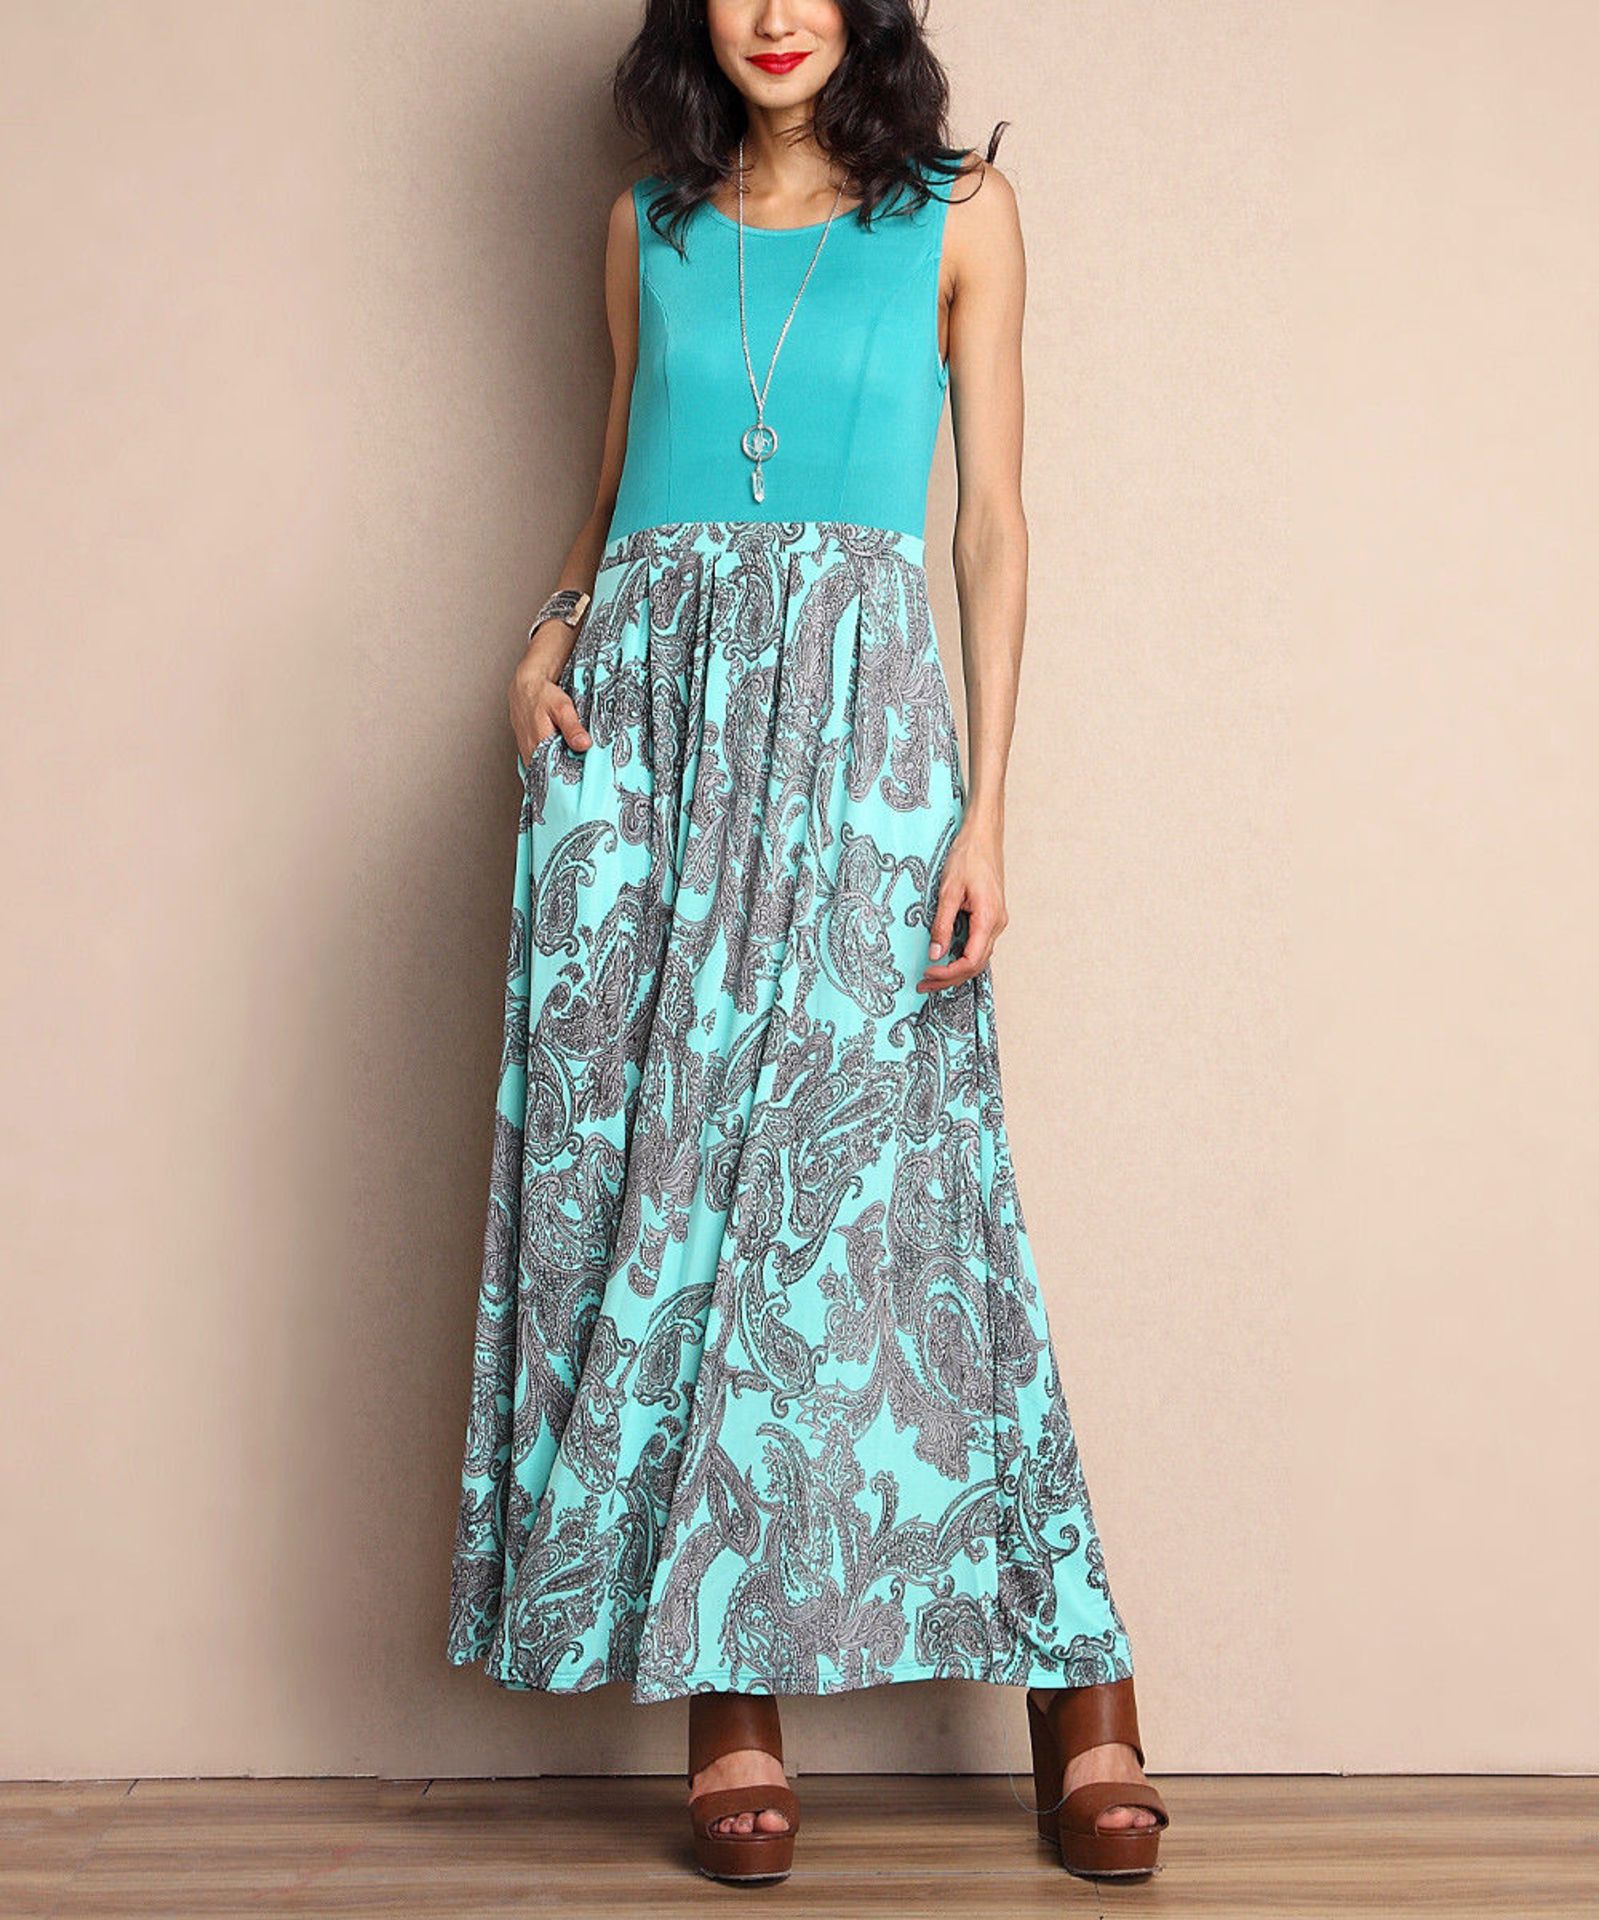 Reborn Collection Aqua Paisley Tank Maxi Dress, UK Size 16-18 US 12-14 (New with tags) [Ref: